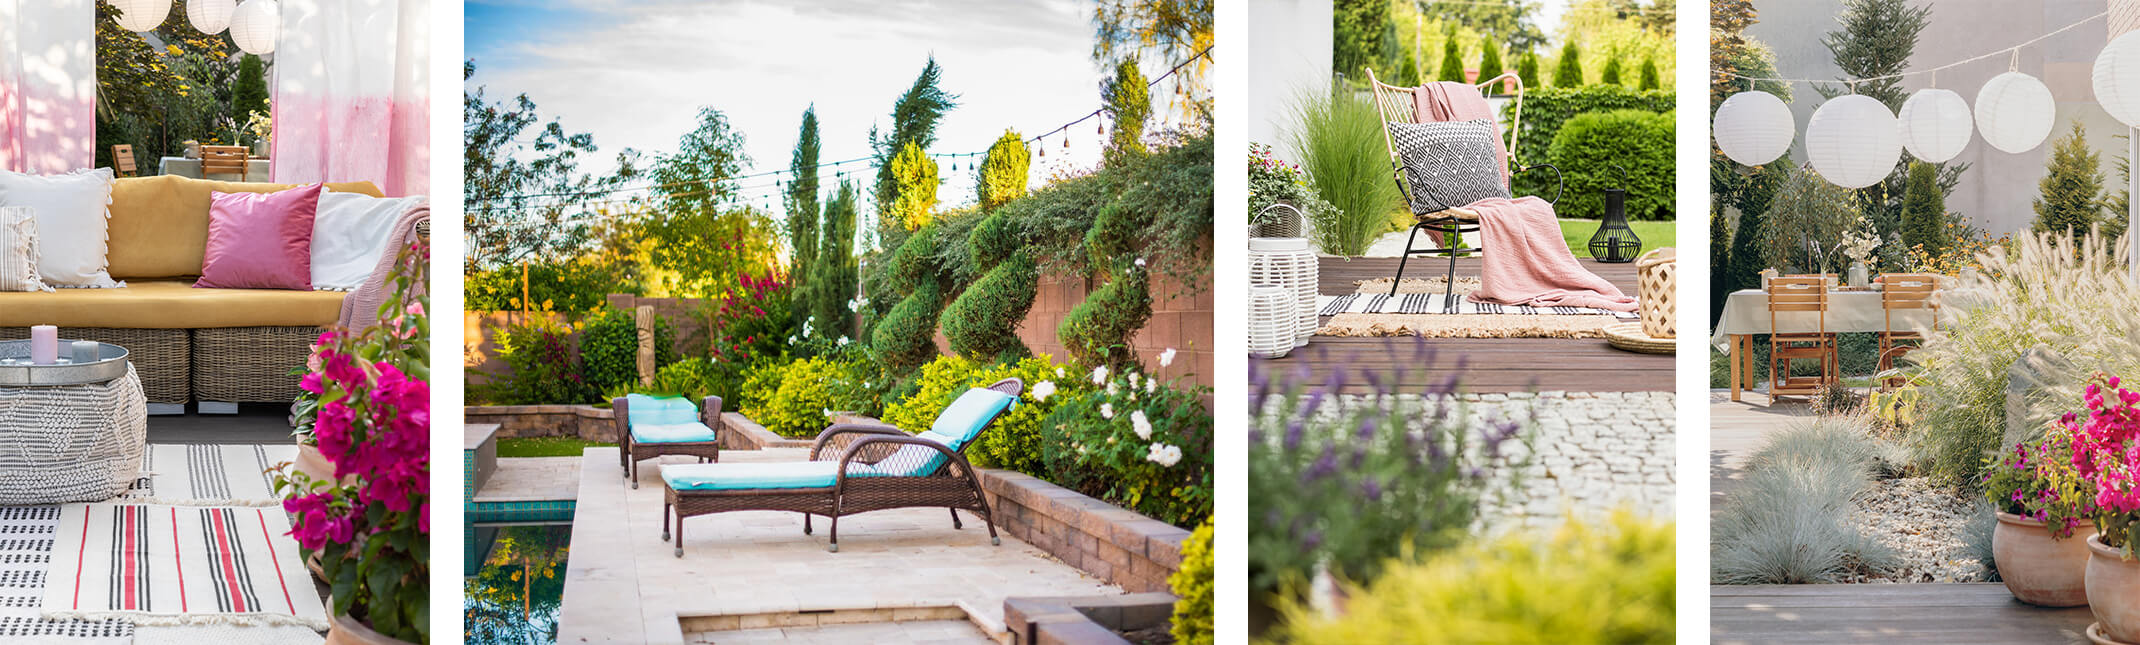 4 different patio images with a wide variety of outdoor living items and plants.